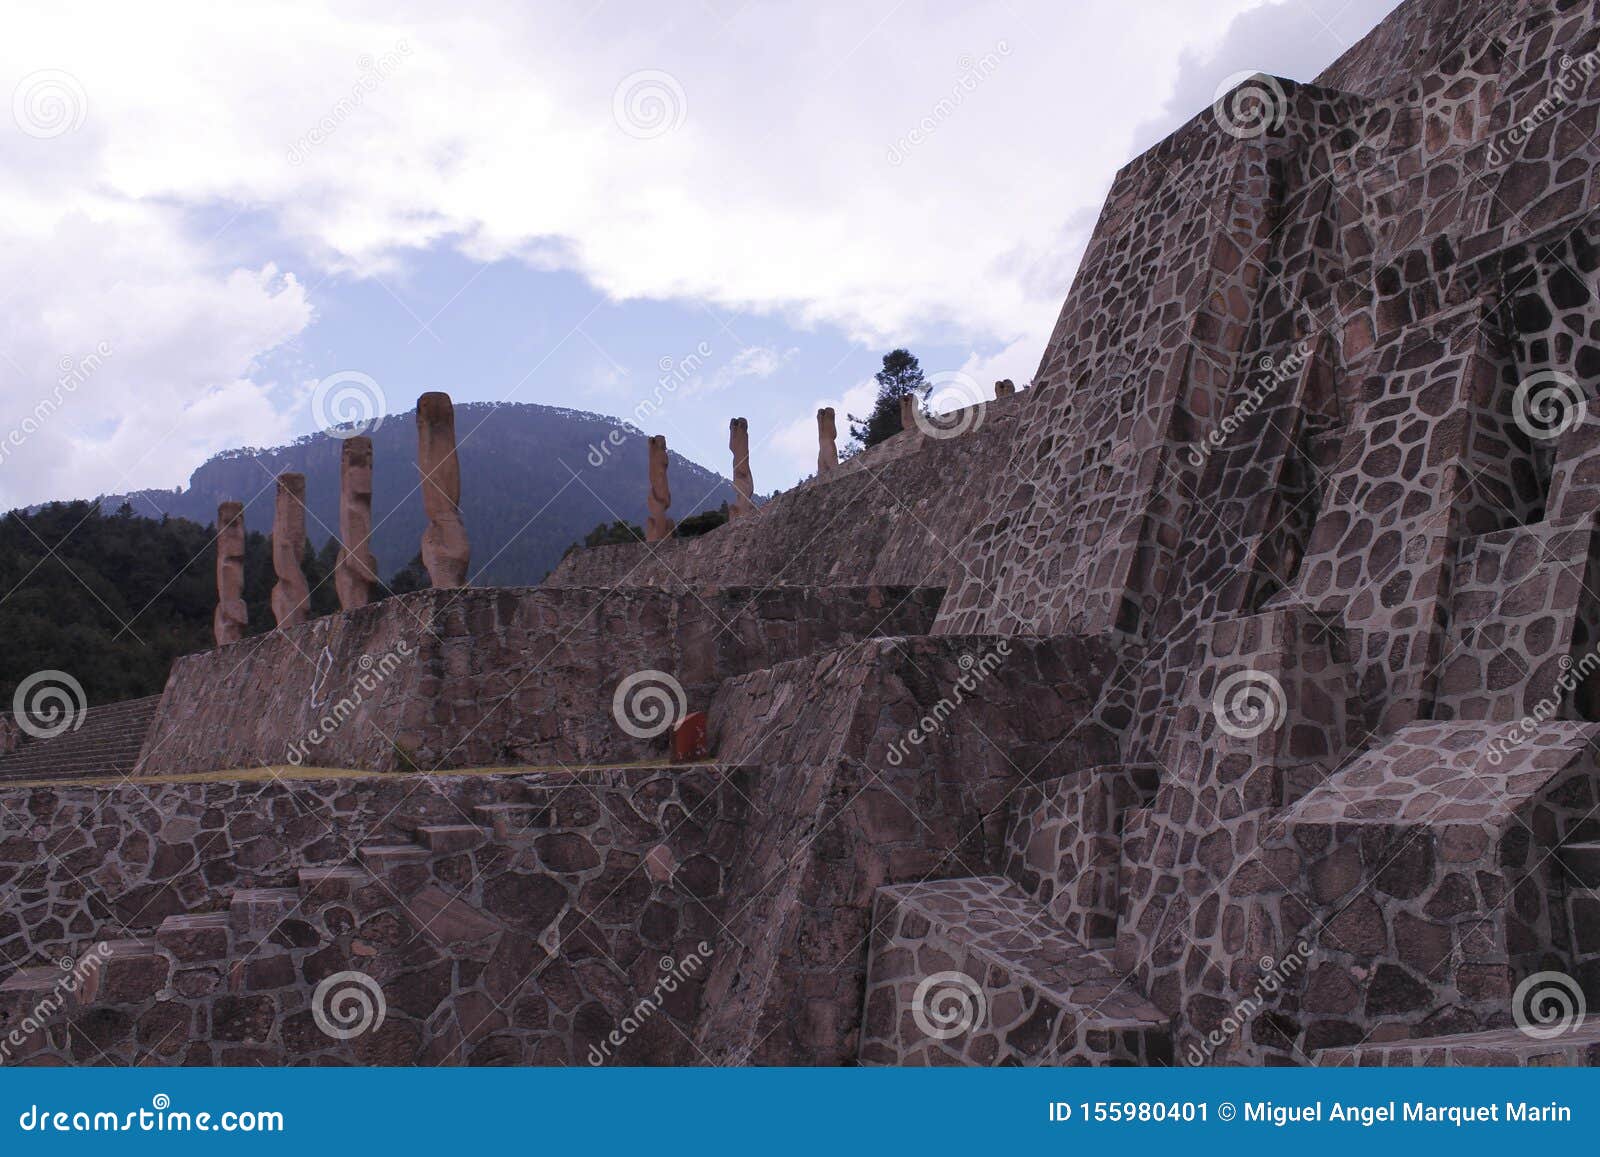 monuments and stairs, centro ceremonial otomi in estado de mexico. side view